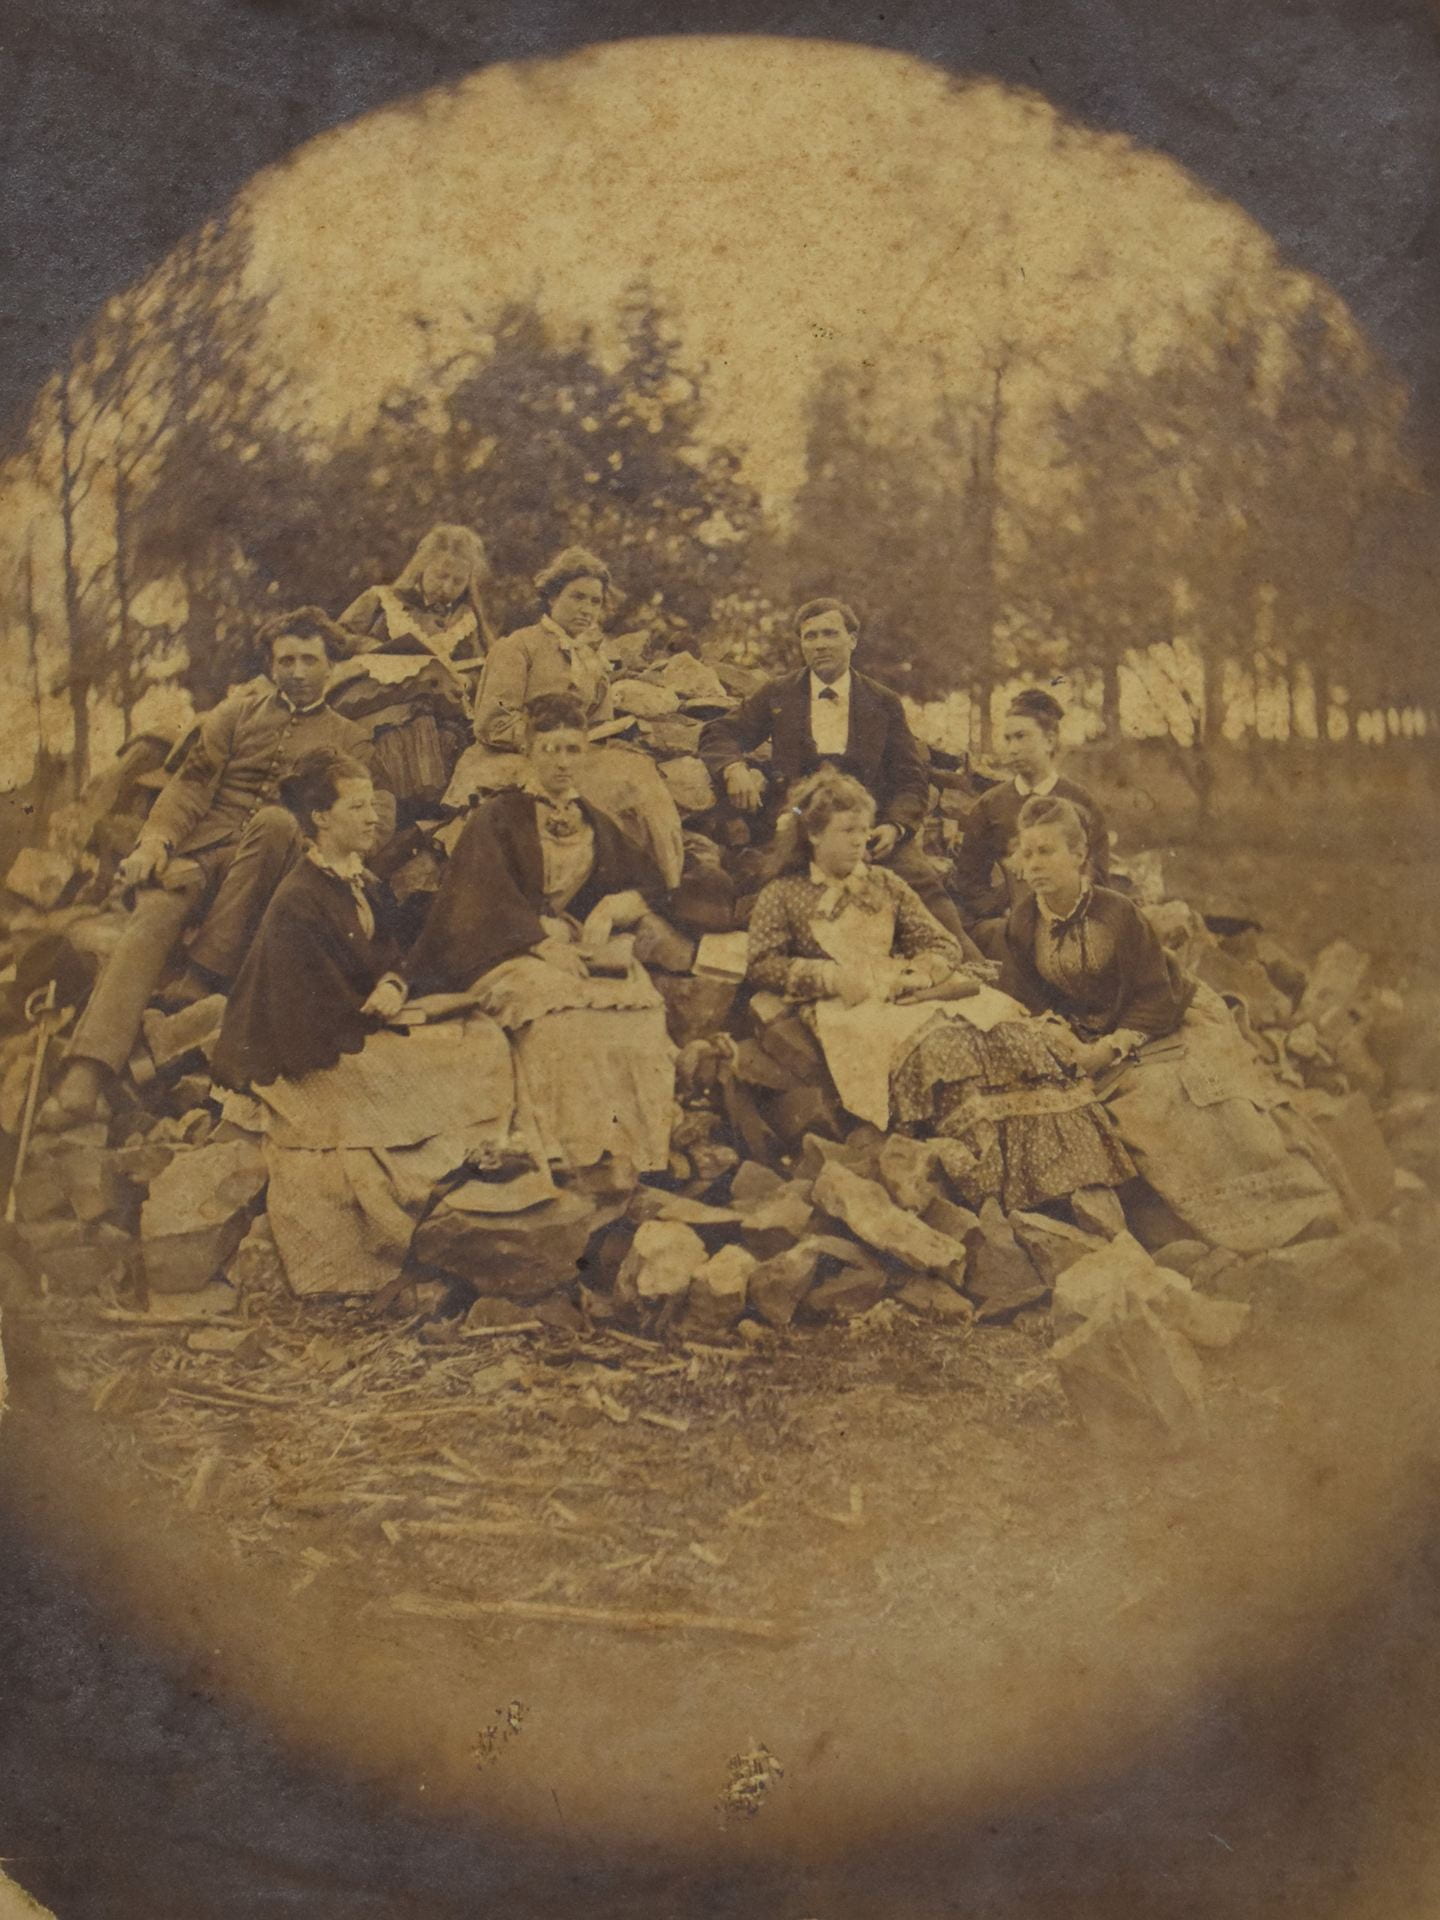 A black and white posed portrait with nine people sitting on a pile of rocks outside with trees in the background. They are all dressed formally in 19th century dresses and suits.